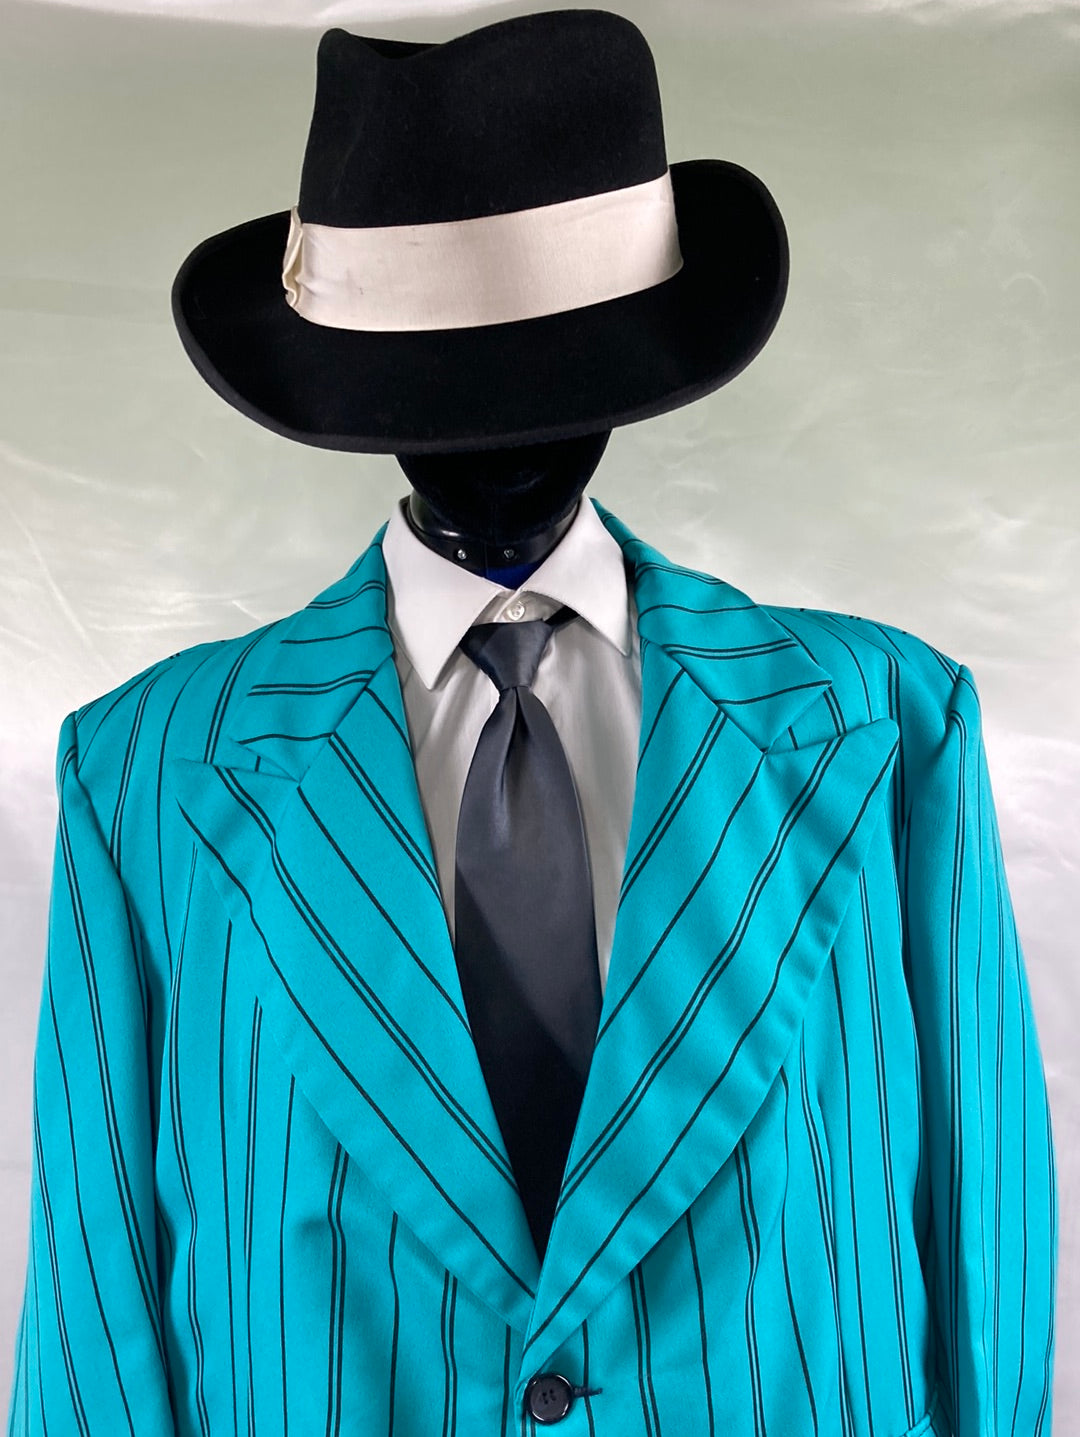 Zoot Suit Teal Green Mobster Costume Men's XLG - Preowned